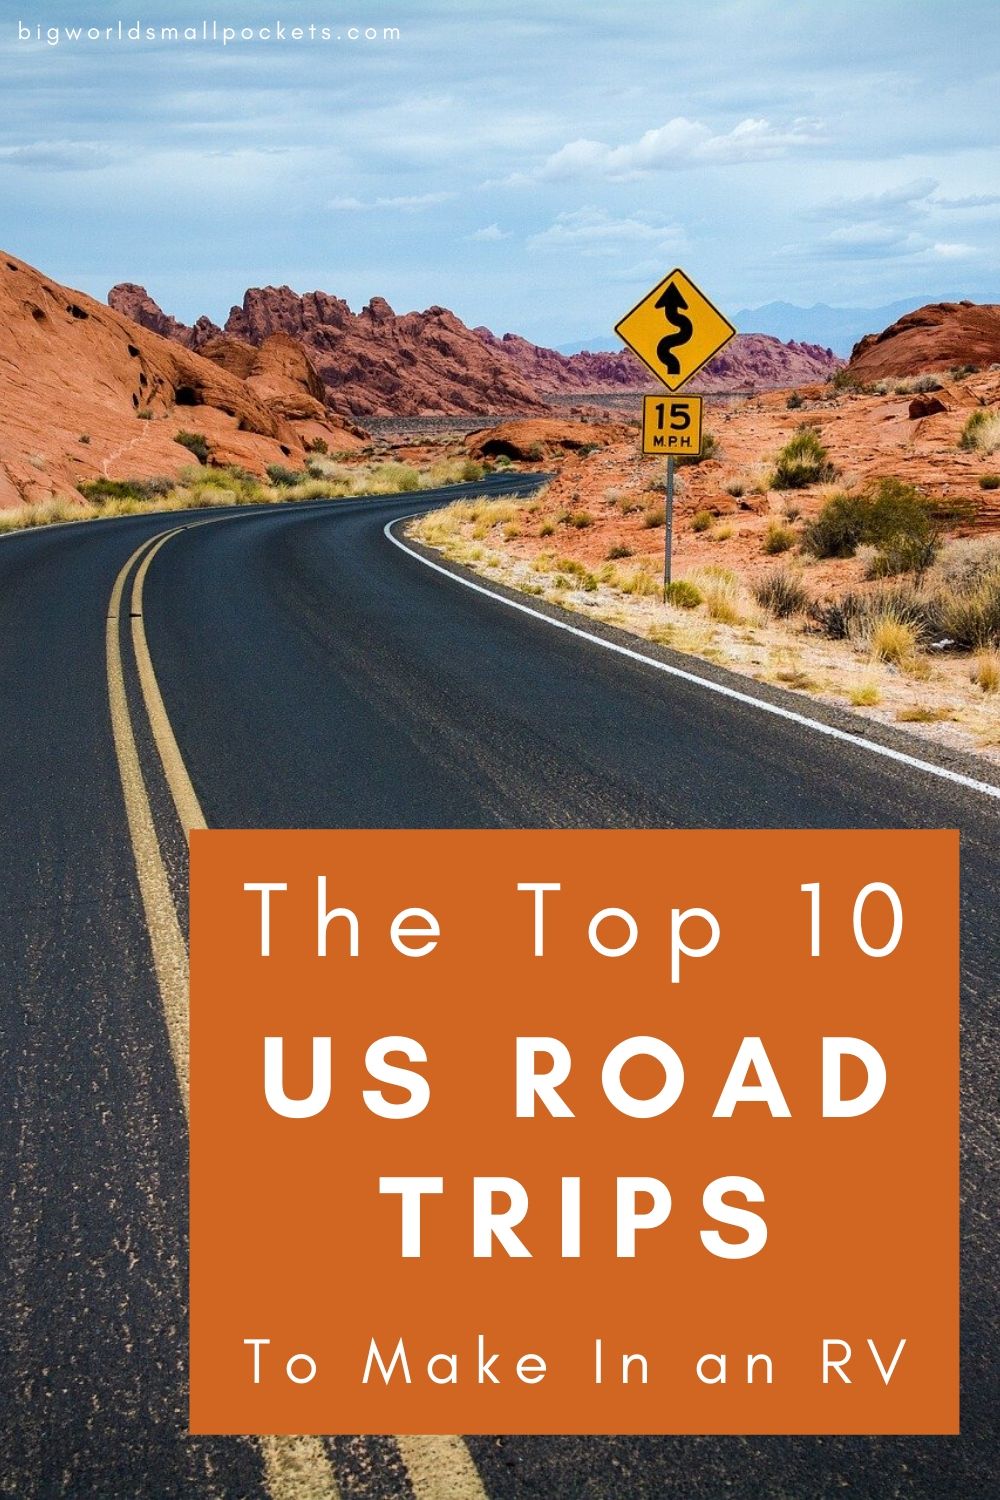 10 BEST US Road Trips to Make in an RV - Big World Small Pockets